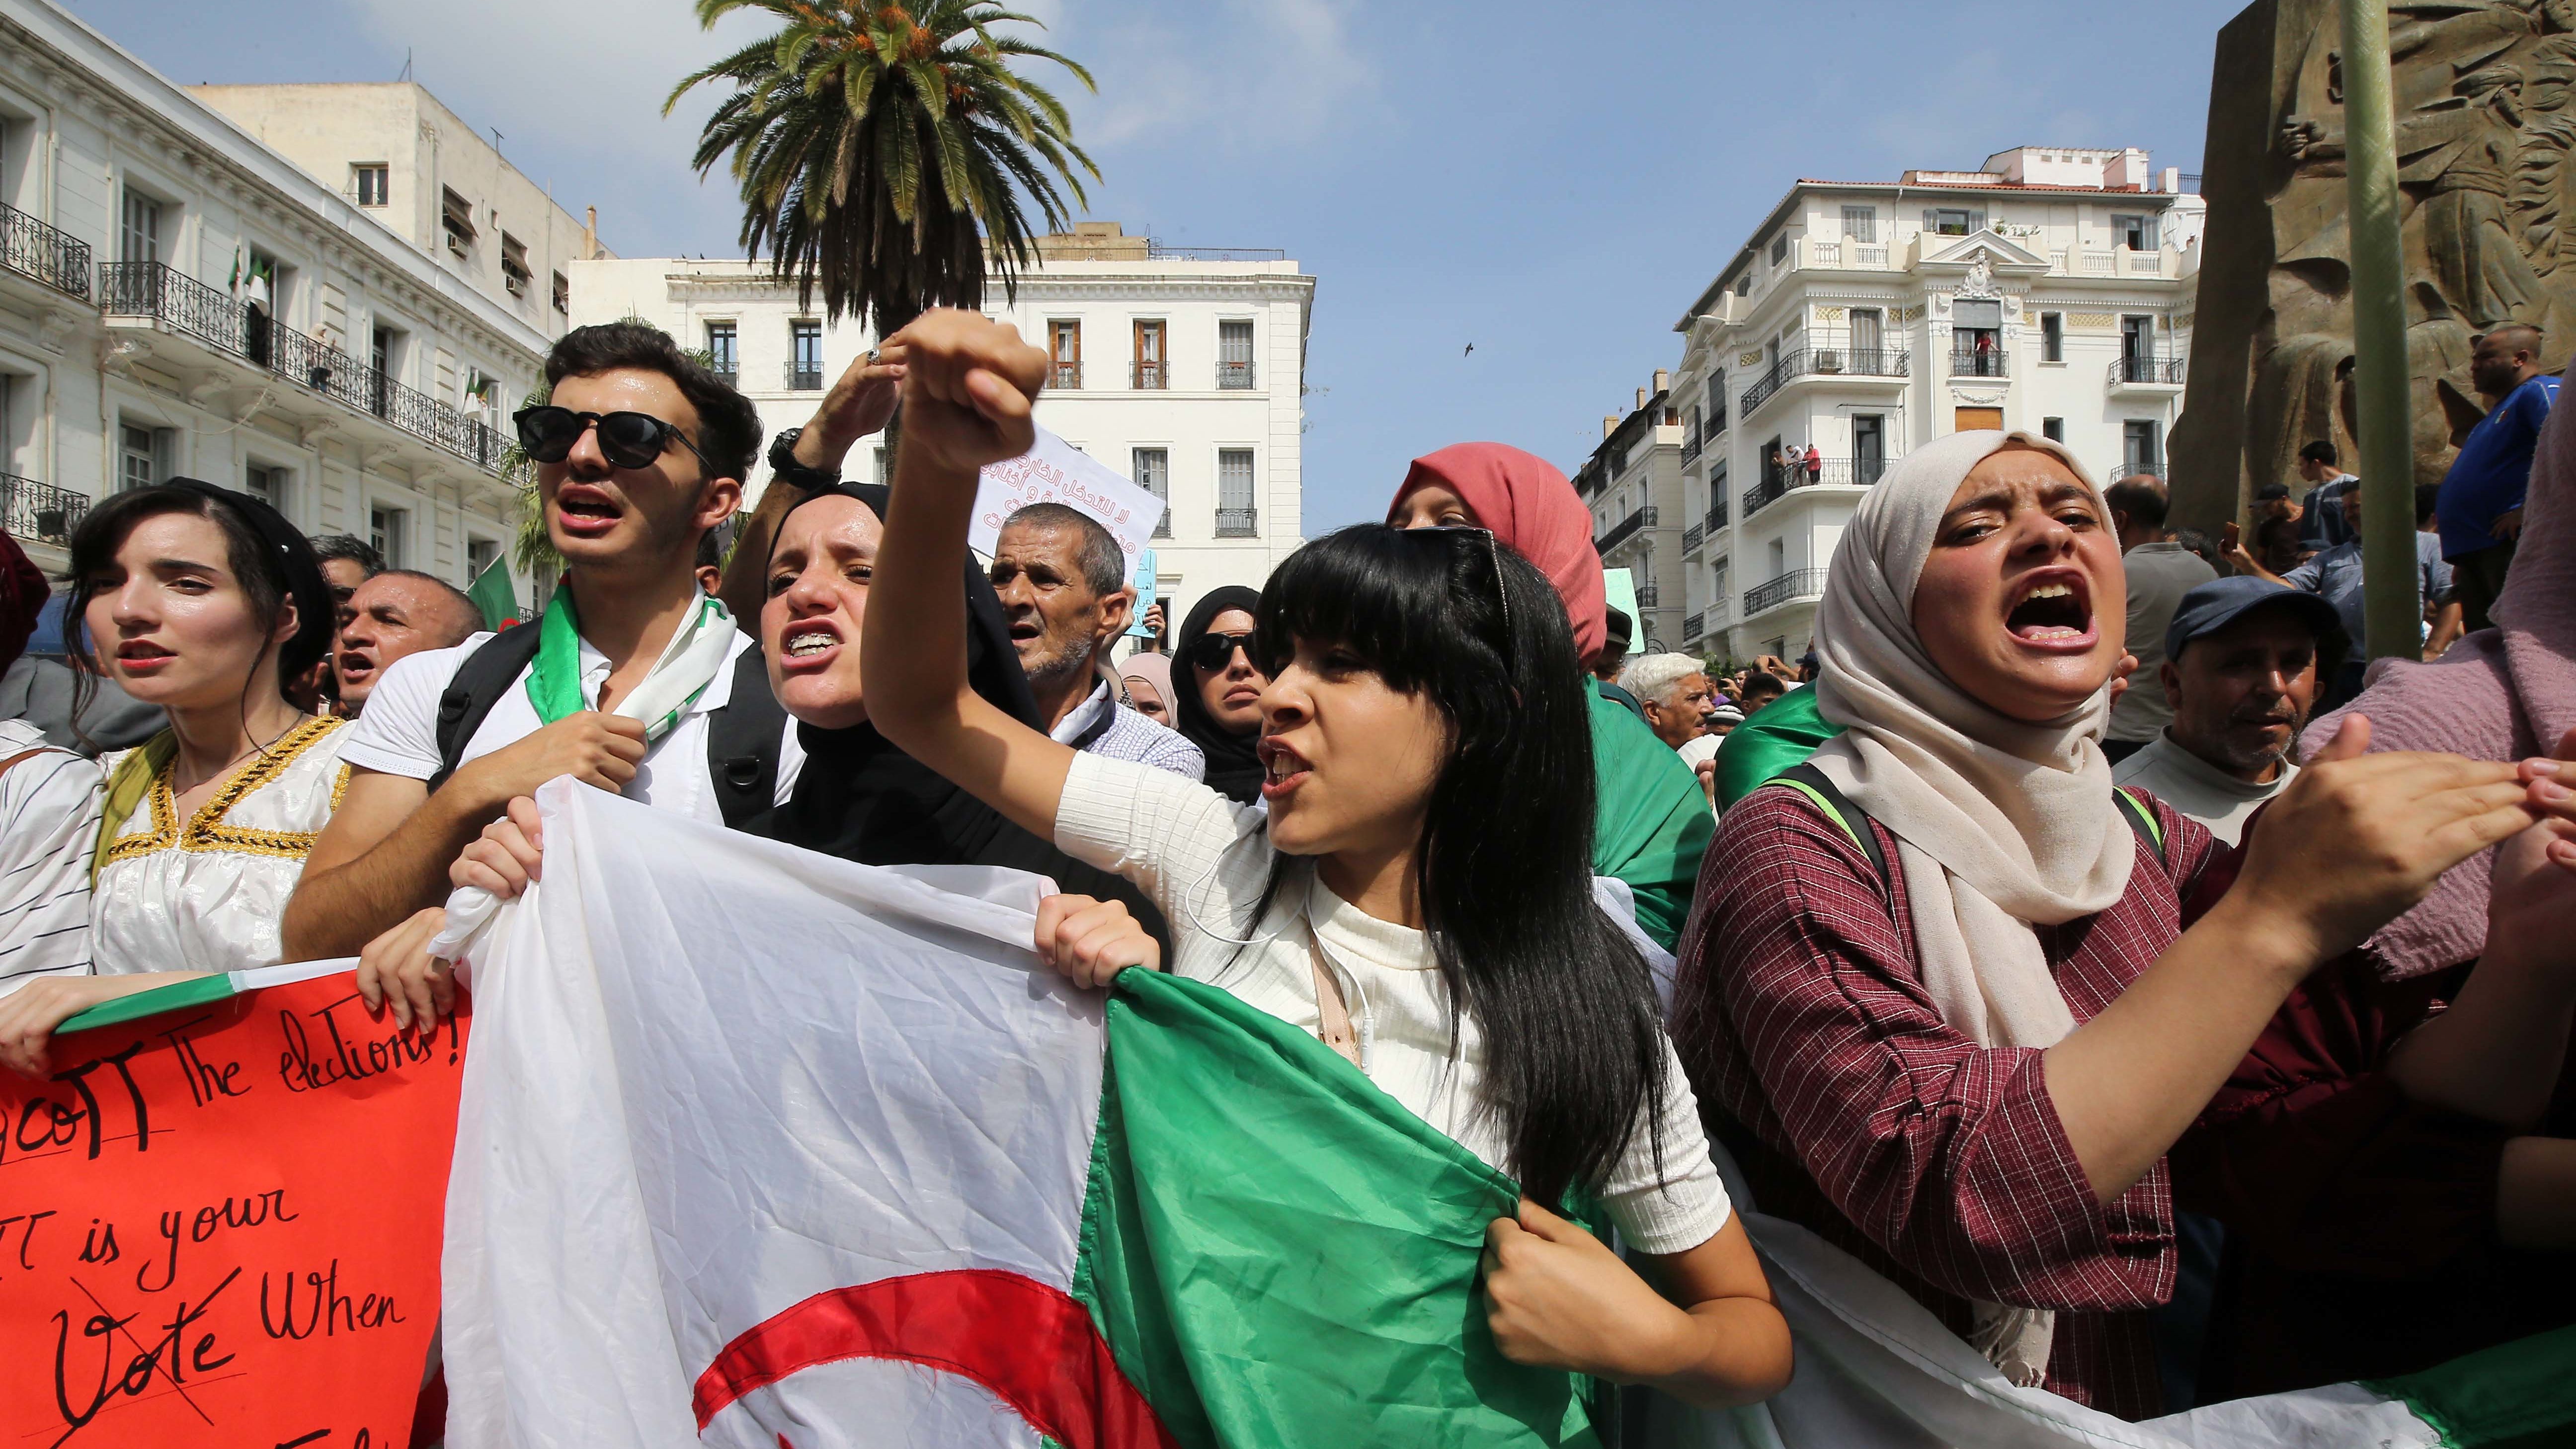 Algeria Seen Clamping Down on Opposition